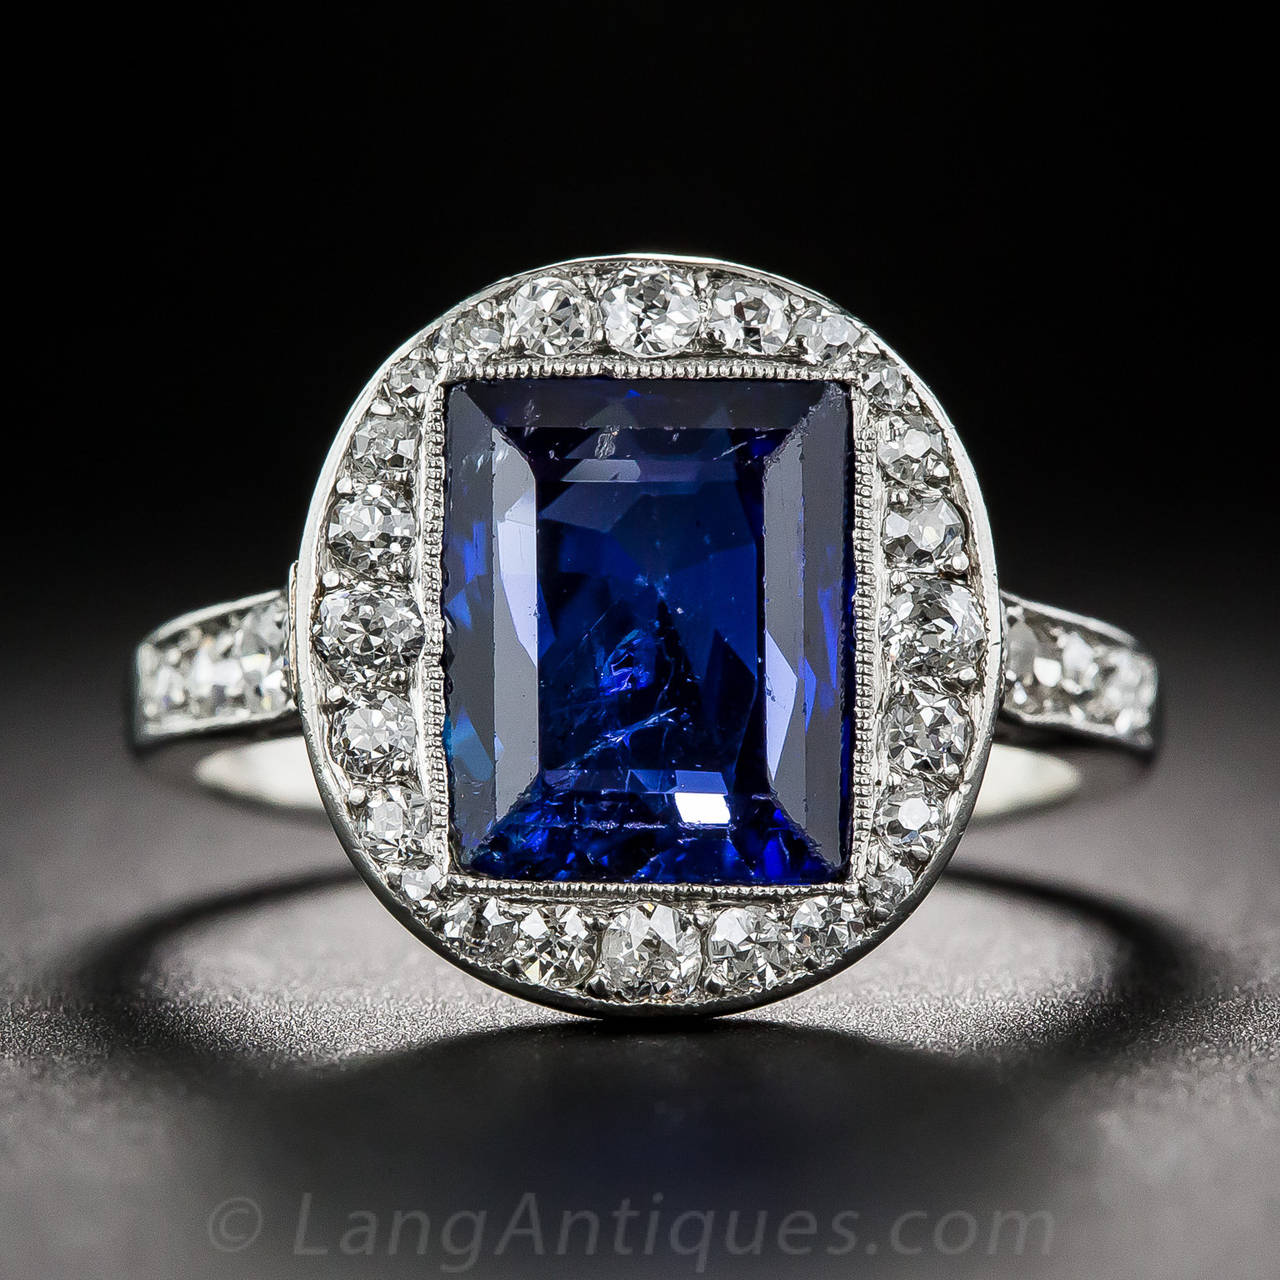 From the apex of the Art Deco period - circa 1925 - via Paris, France, comes this exquisite platinum and diamond jewel featuring a rich and ravishing, royal-blue, natural emerald-cut sapphire originating from the long ago exhausted mines of old